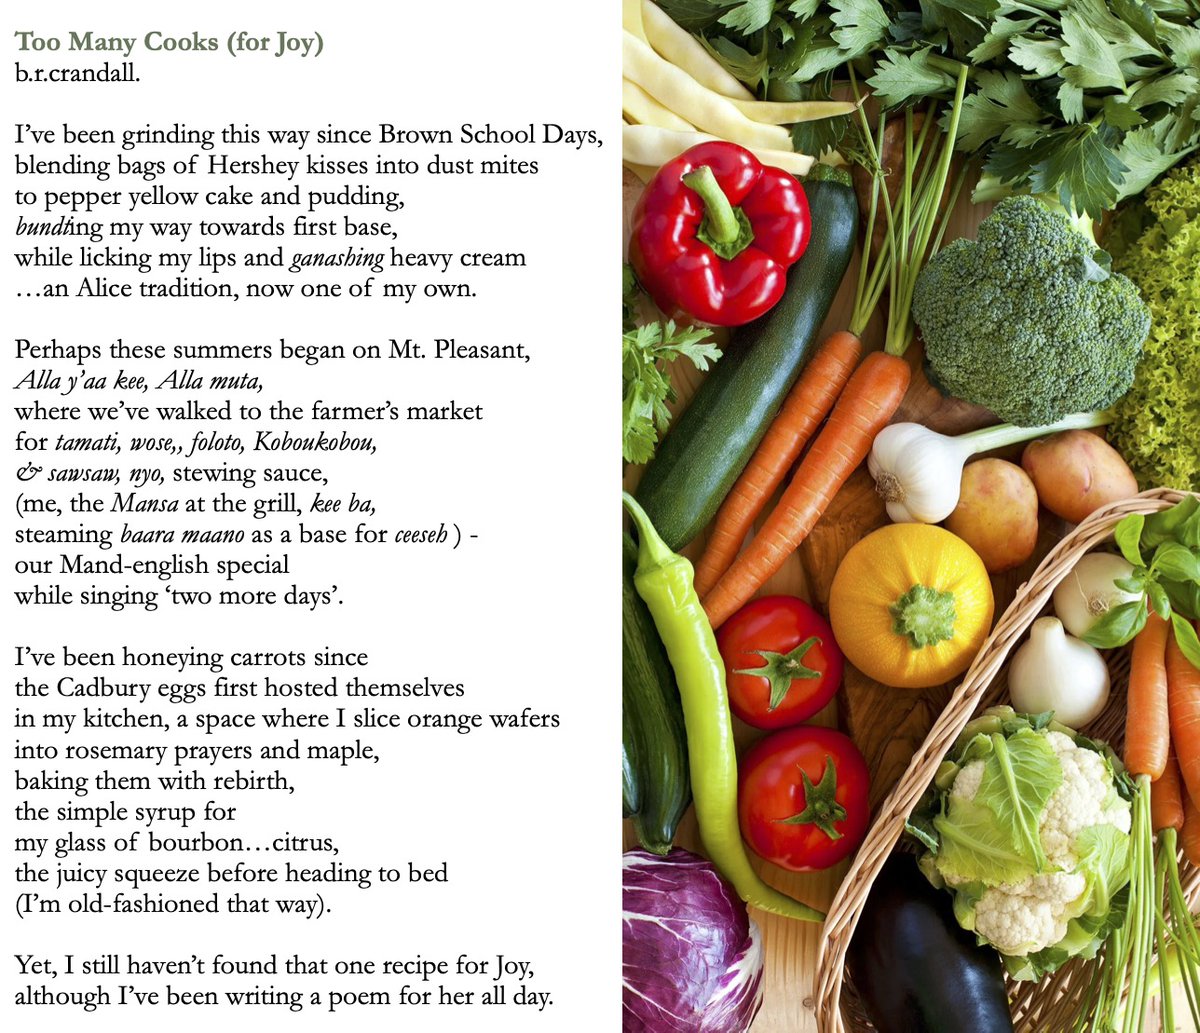 Day 21 with @Joyteamstars, #VerseLove '24, Being Brought into the Kitchen to Find the Words that Will Meet Us There - 'Too Many Cooks' - Happy Earth Day.